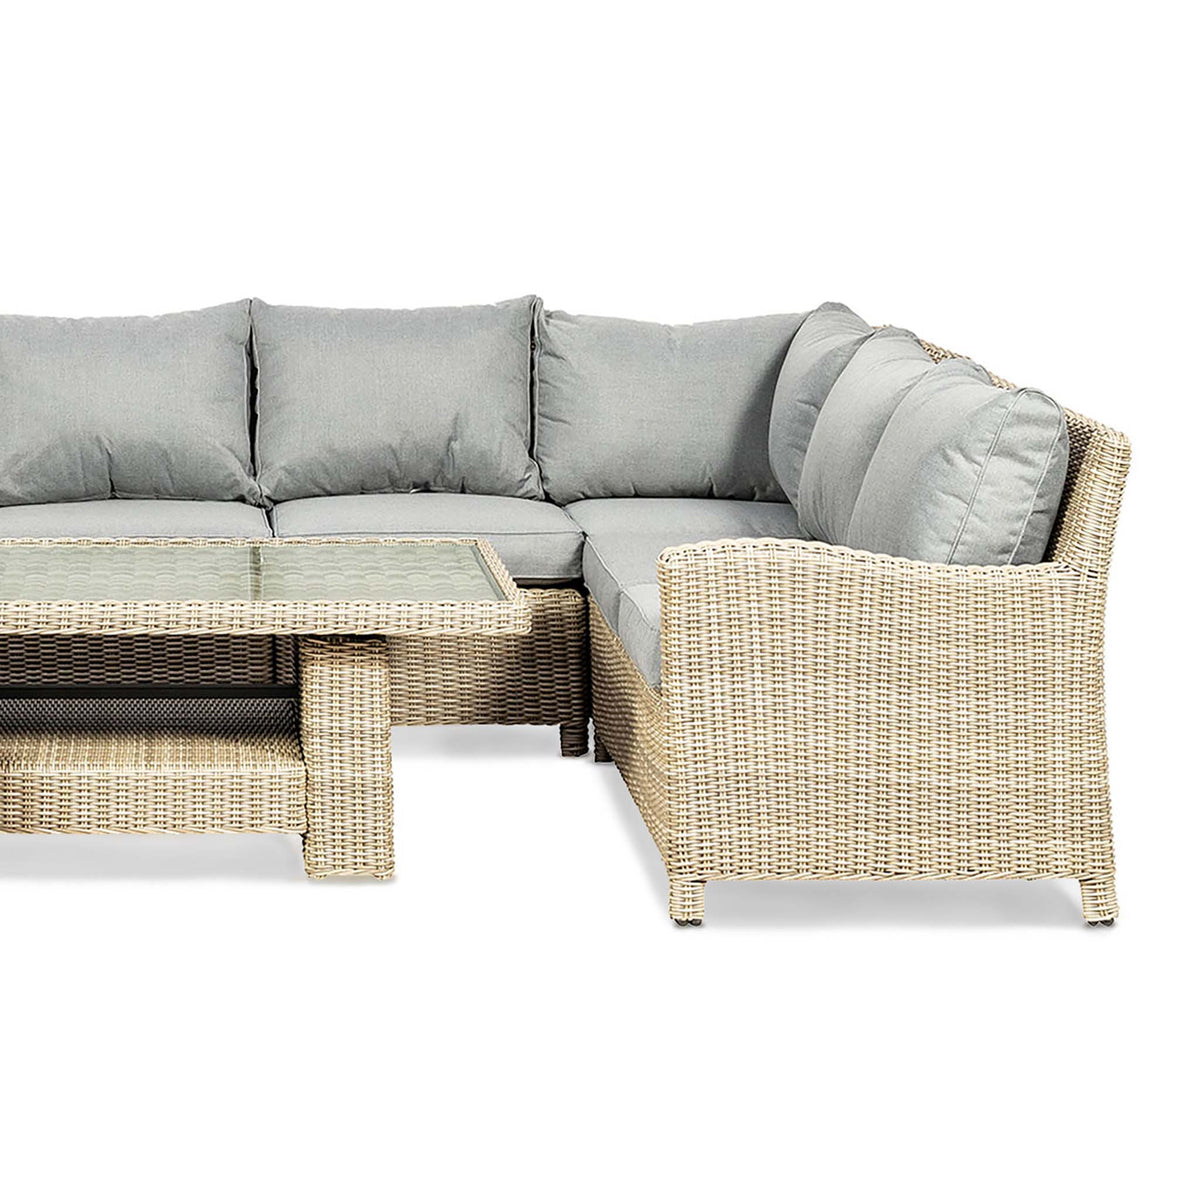 Wentworth Deluxe Rattan Corner Sofa Garden Lounge Set with Adjustable Table - Close up of side of corner sofa